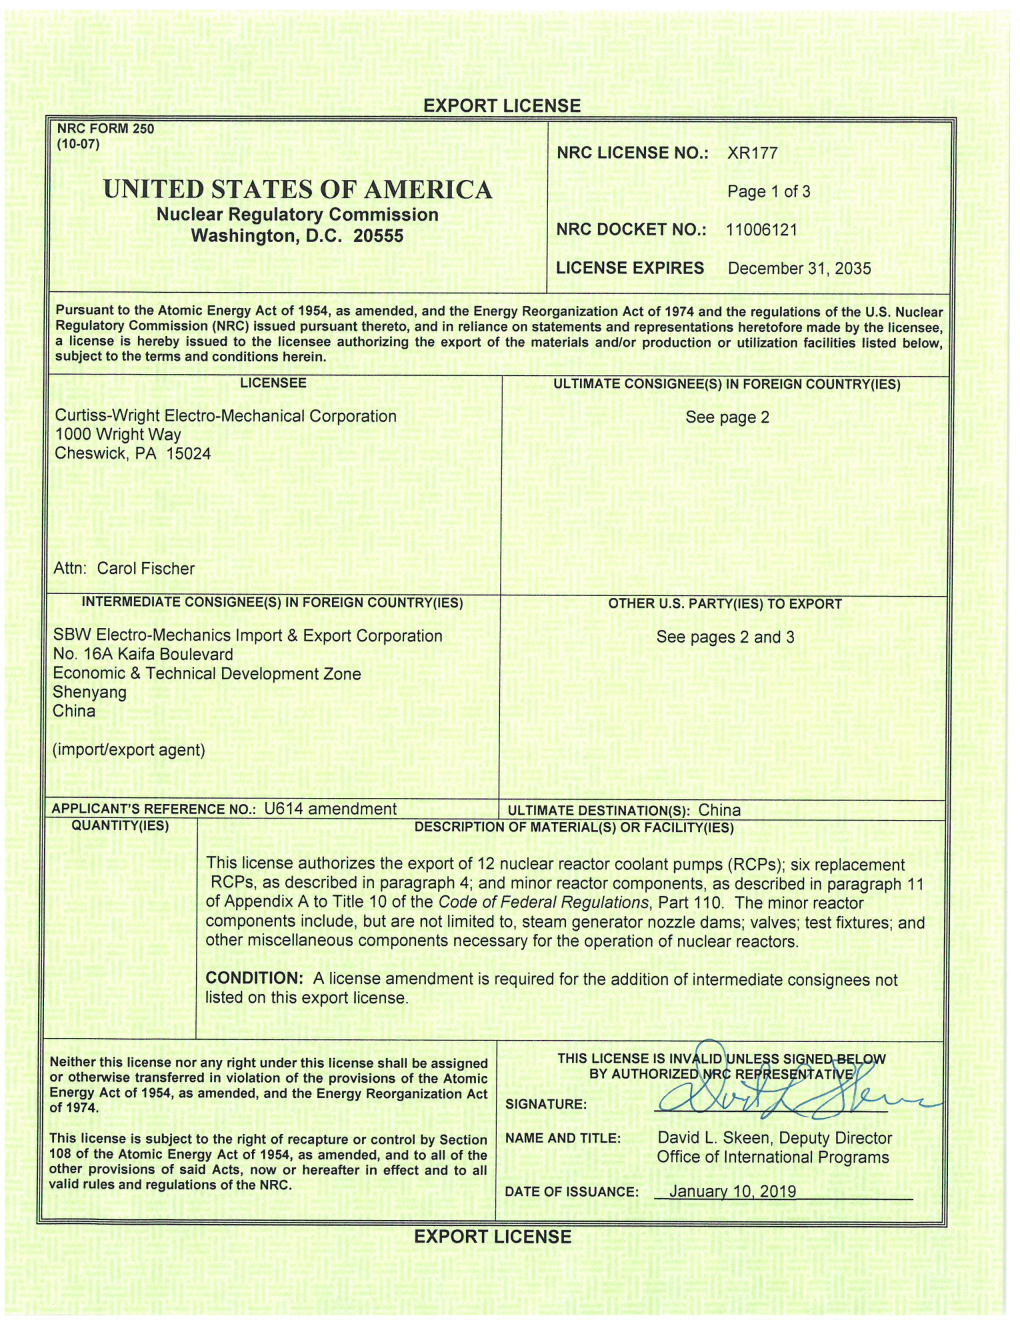 Export License Issued to Curtiss-Wright Electro-Mechanical Corp., XR177, Dated January 10, 2019